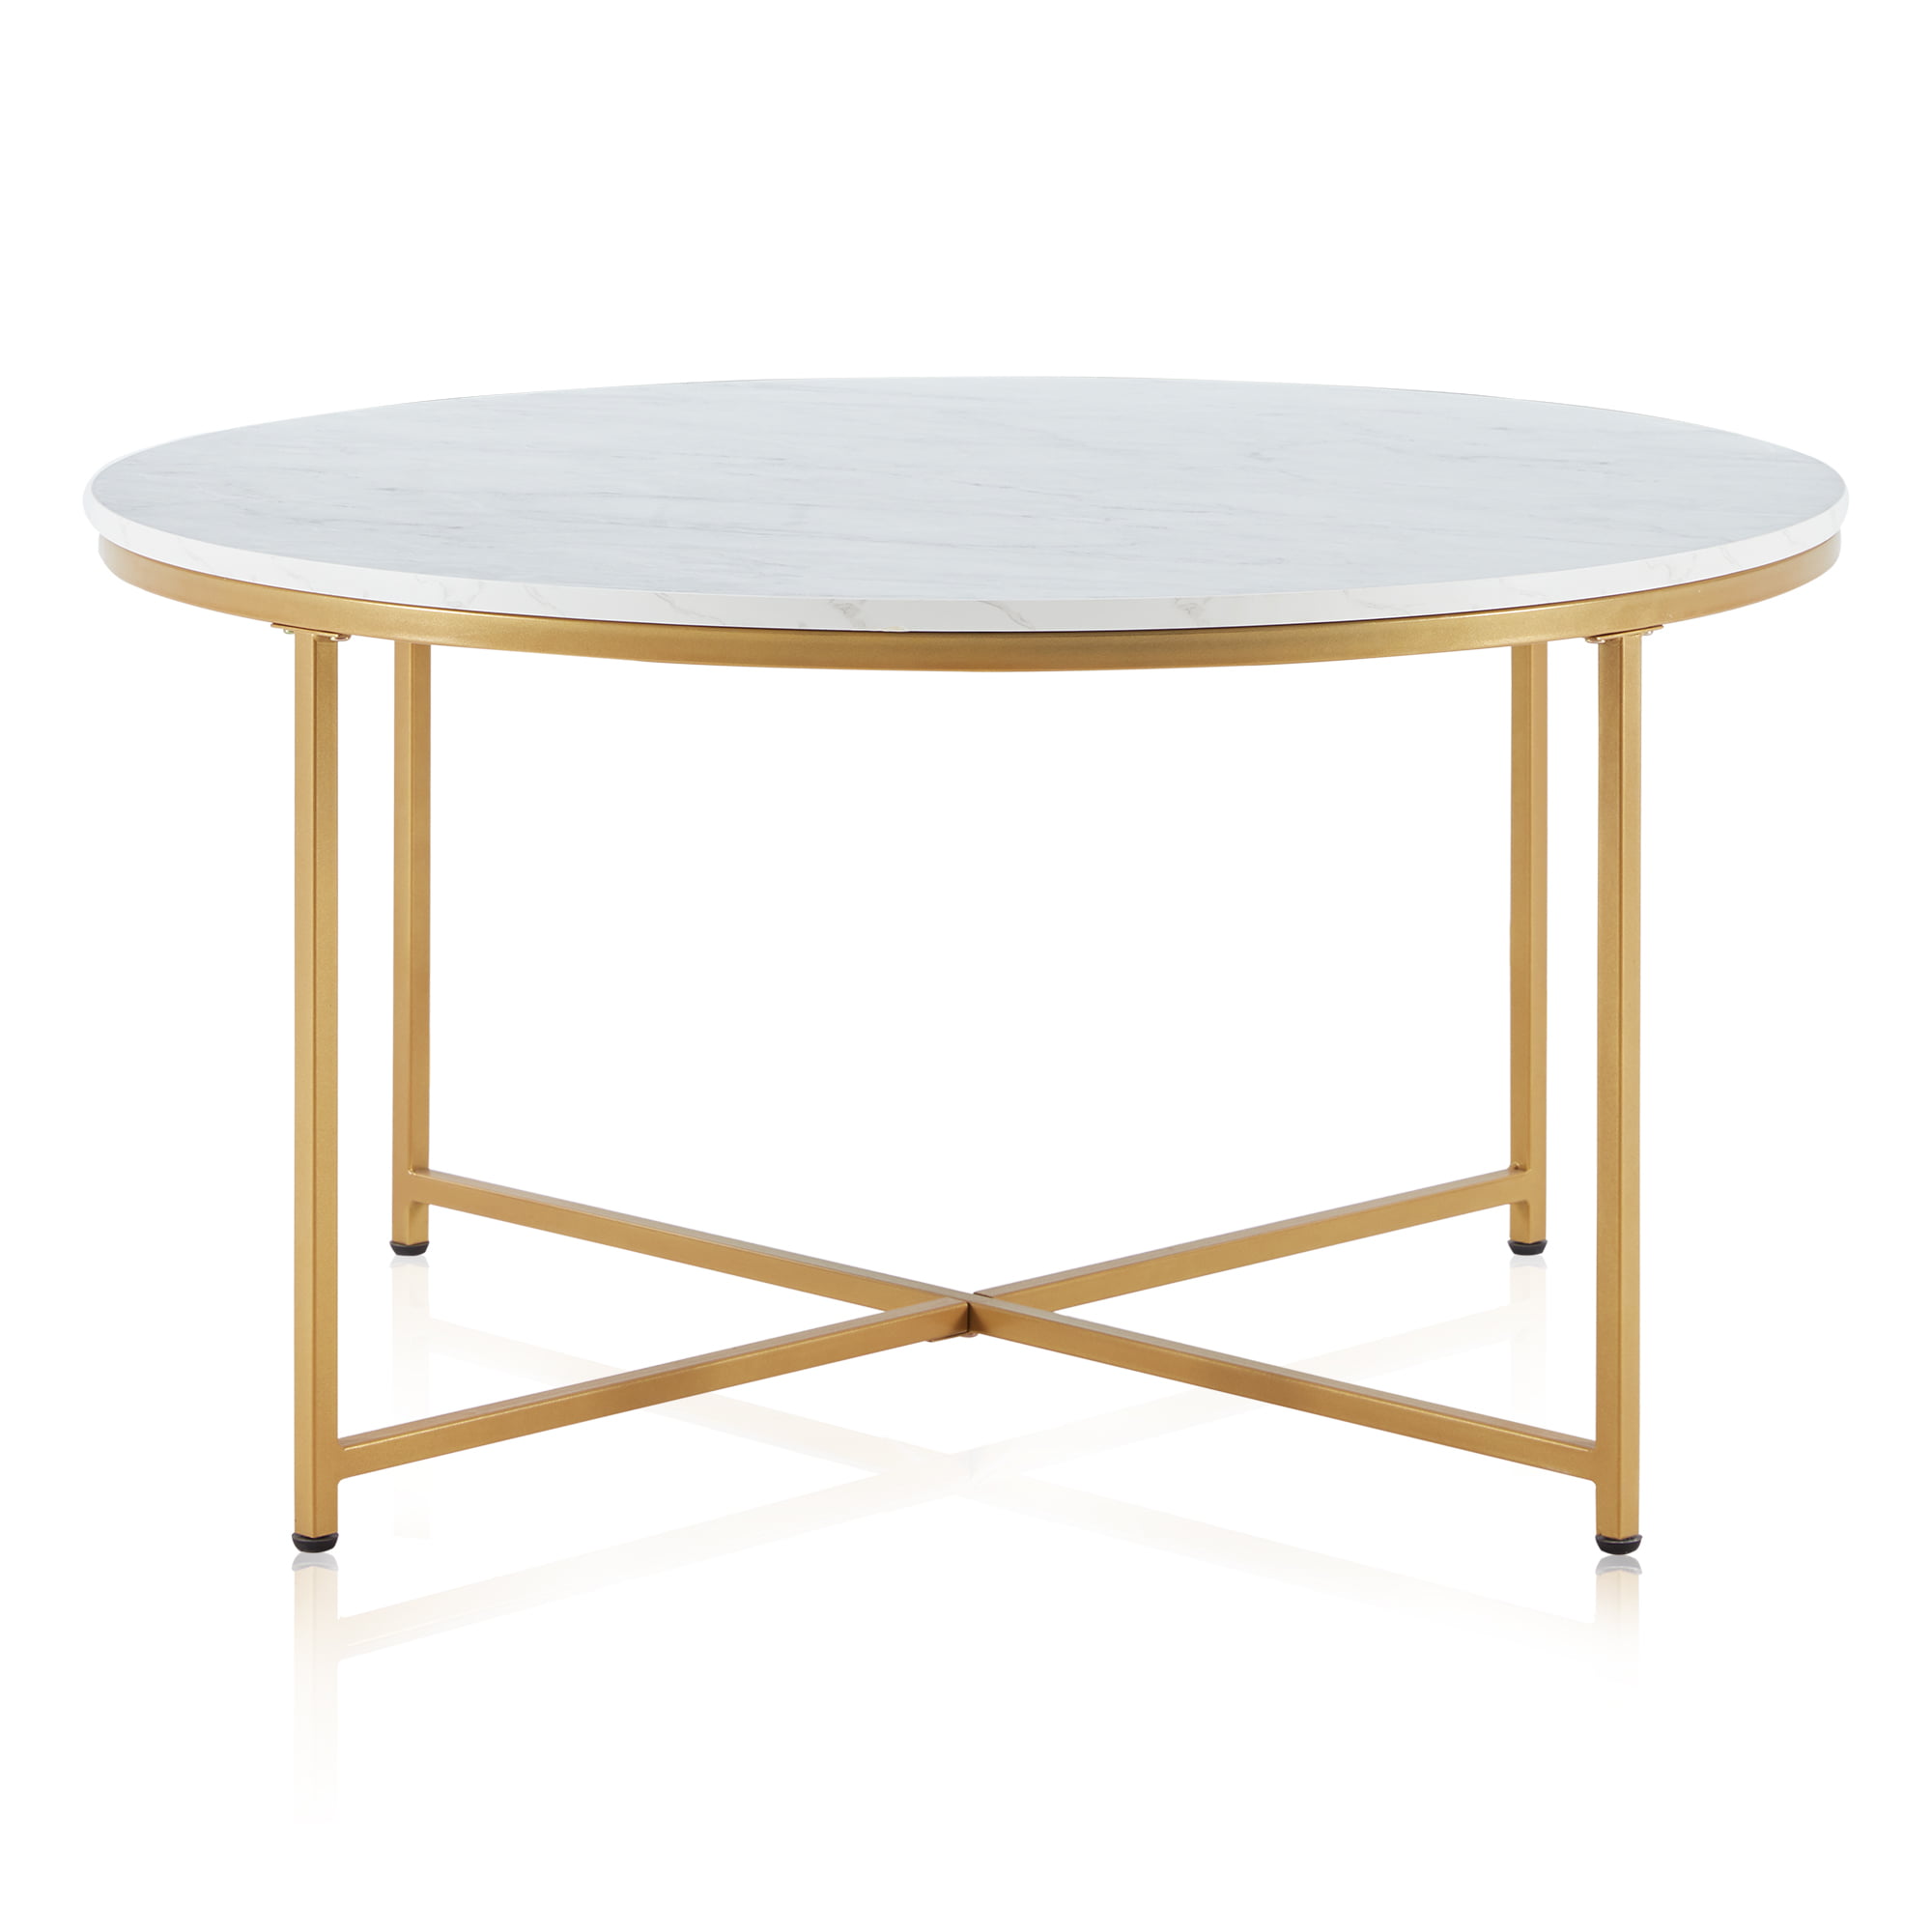 Belleze Yanet Modern Round Coffee Table, Round Coffee Table Decorative Accents